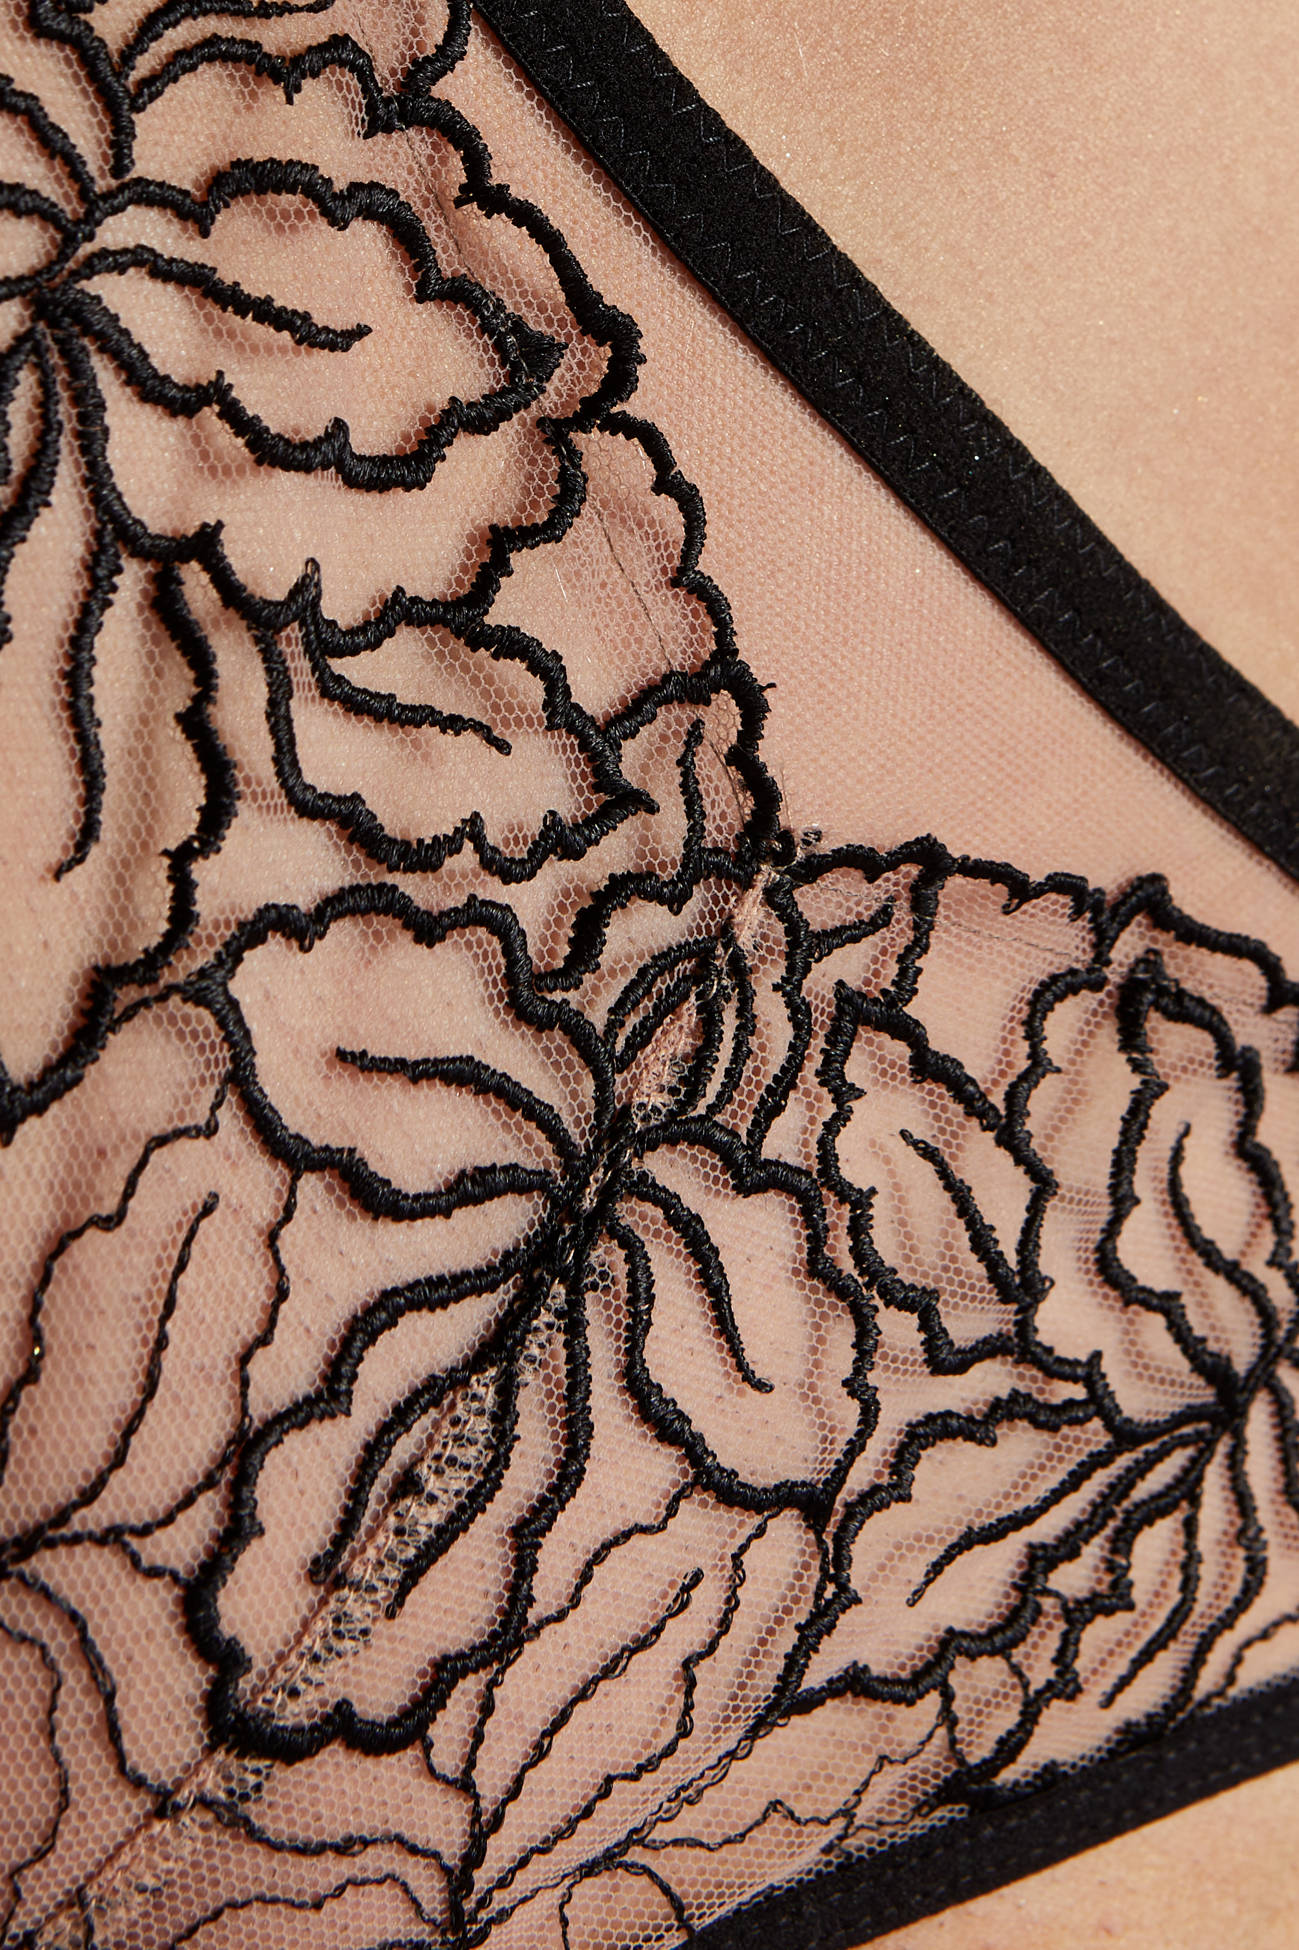 Gorteks Rumi floral embroidery panty beige Autumn-winter 2022 collection